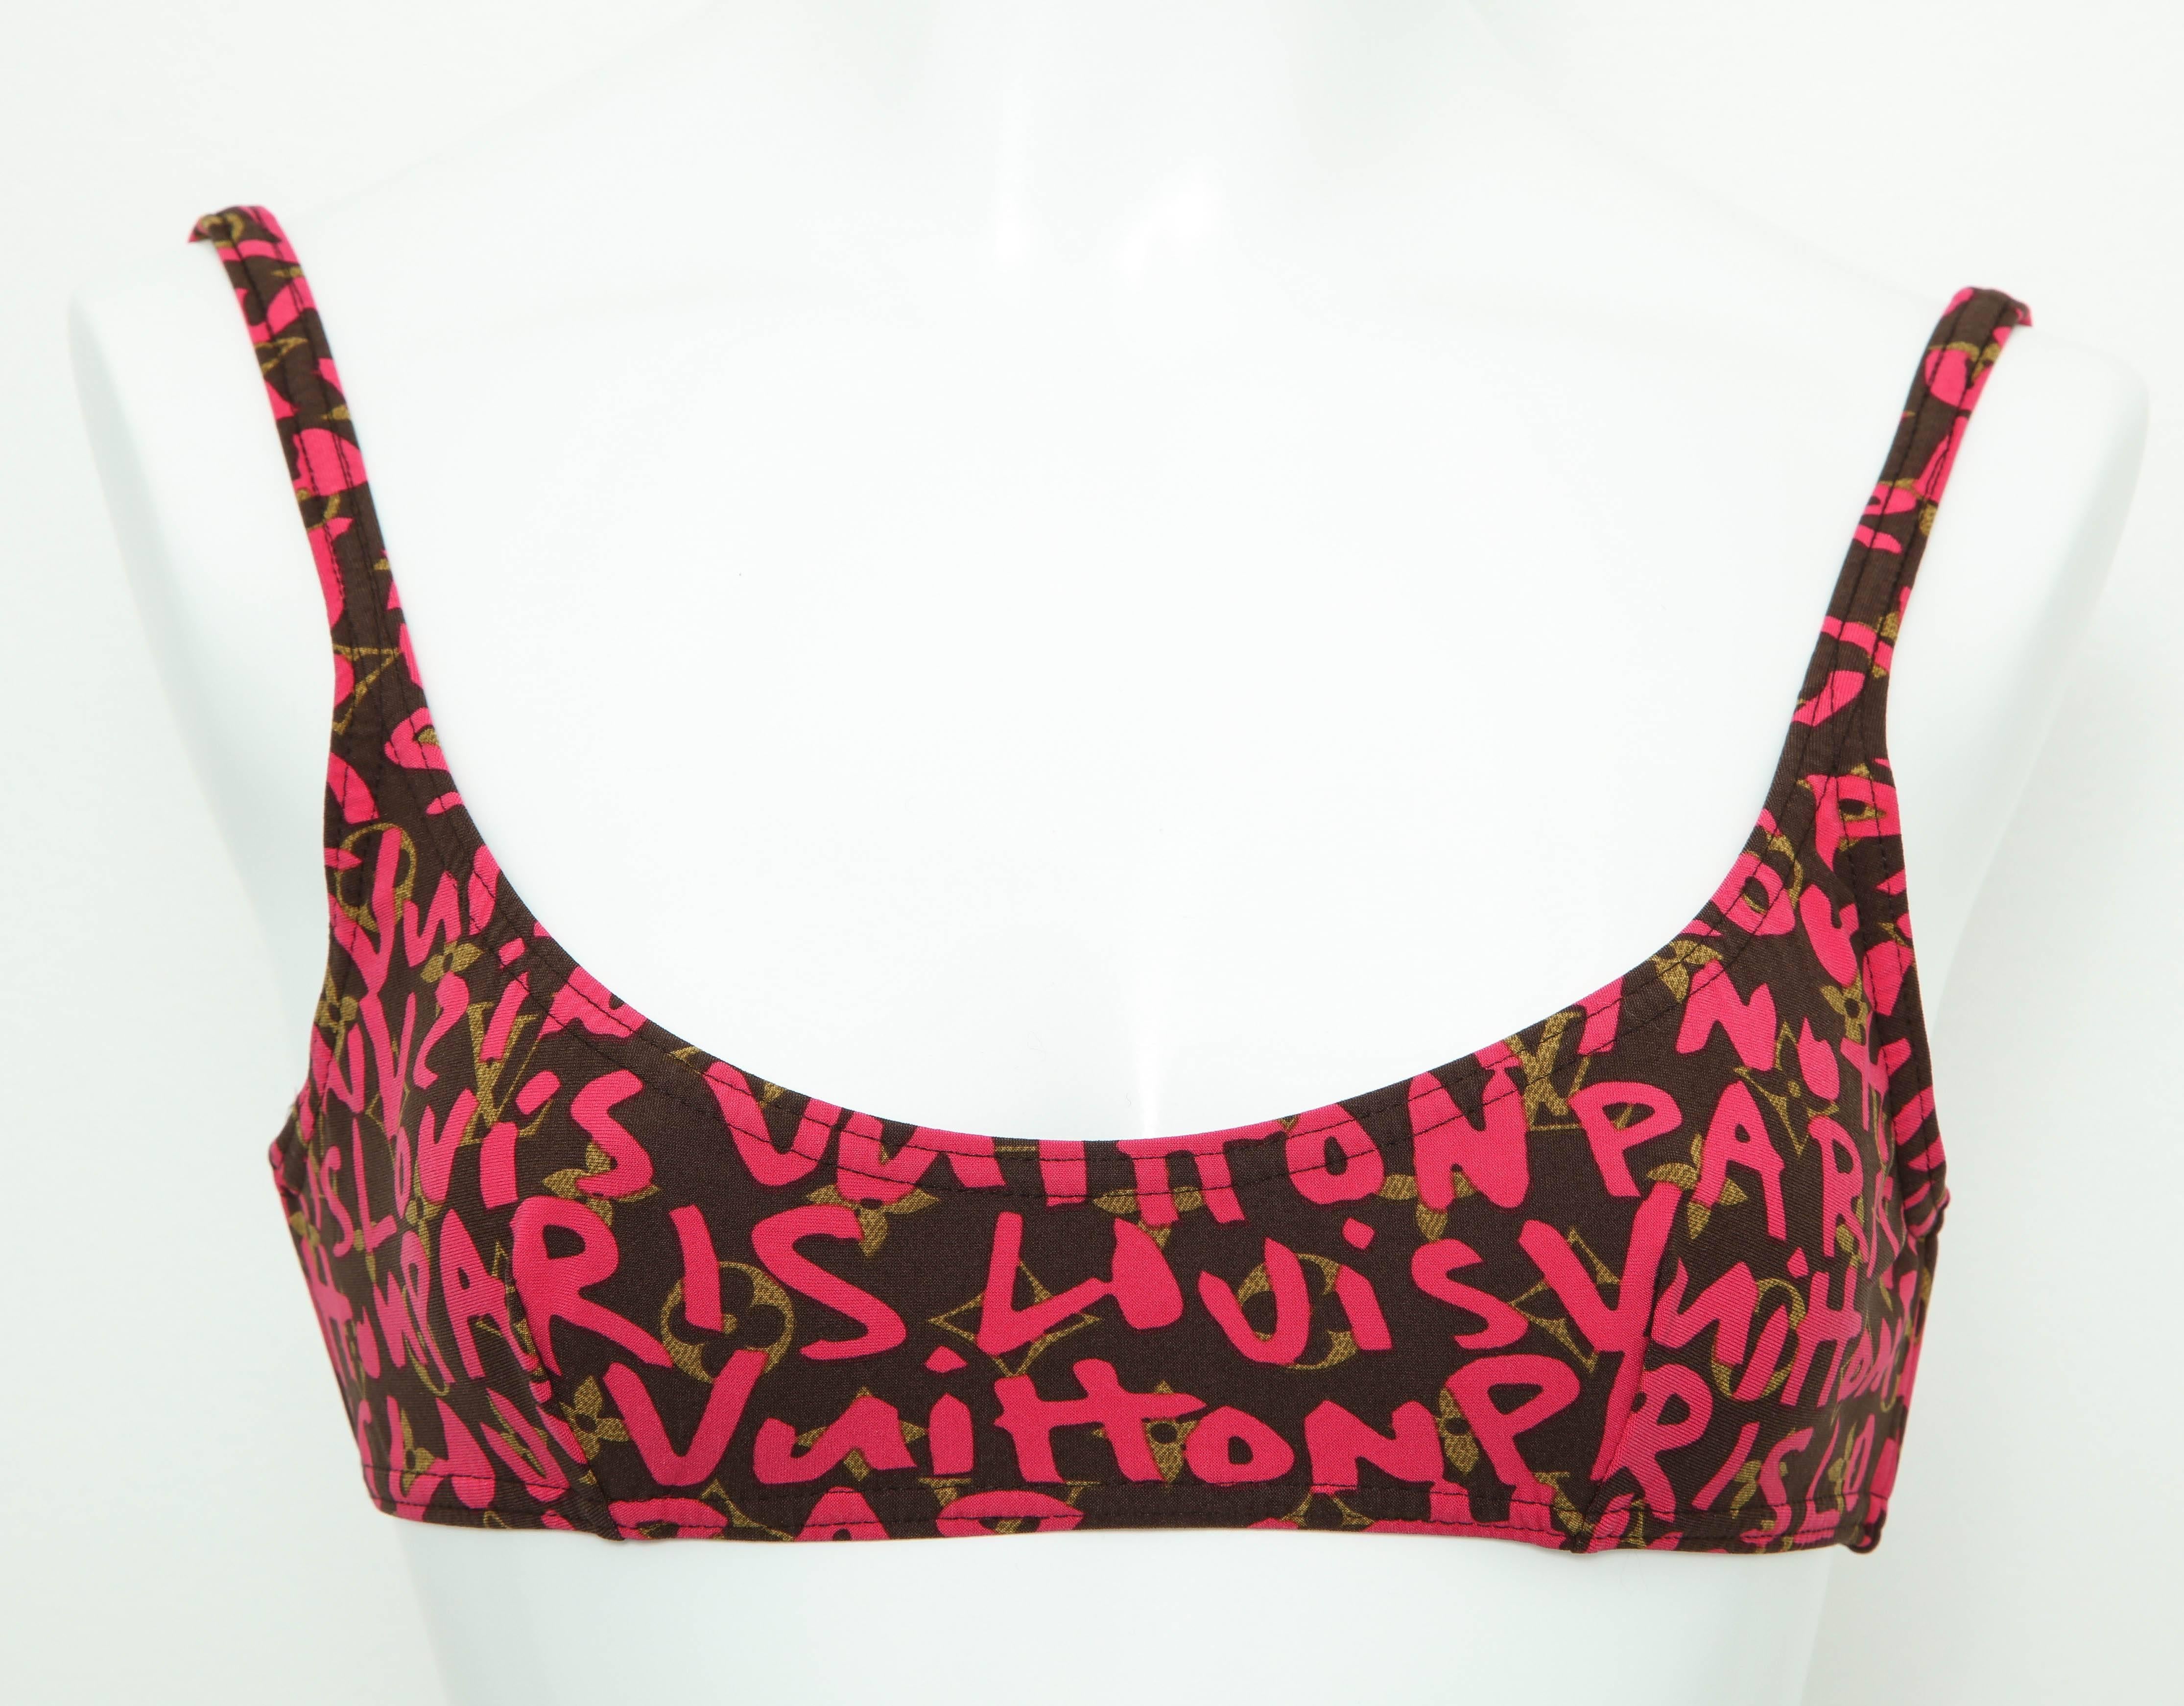 Extremely rare Louis Vuitton bikini with Steven Sprouse's graffiti print in pink.

Designer: Marc Jacobs

Size FR34